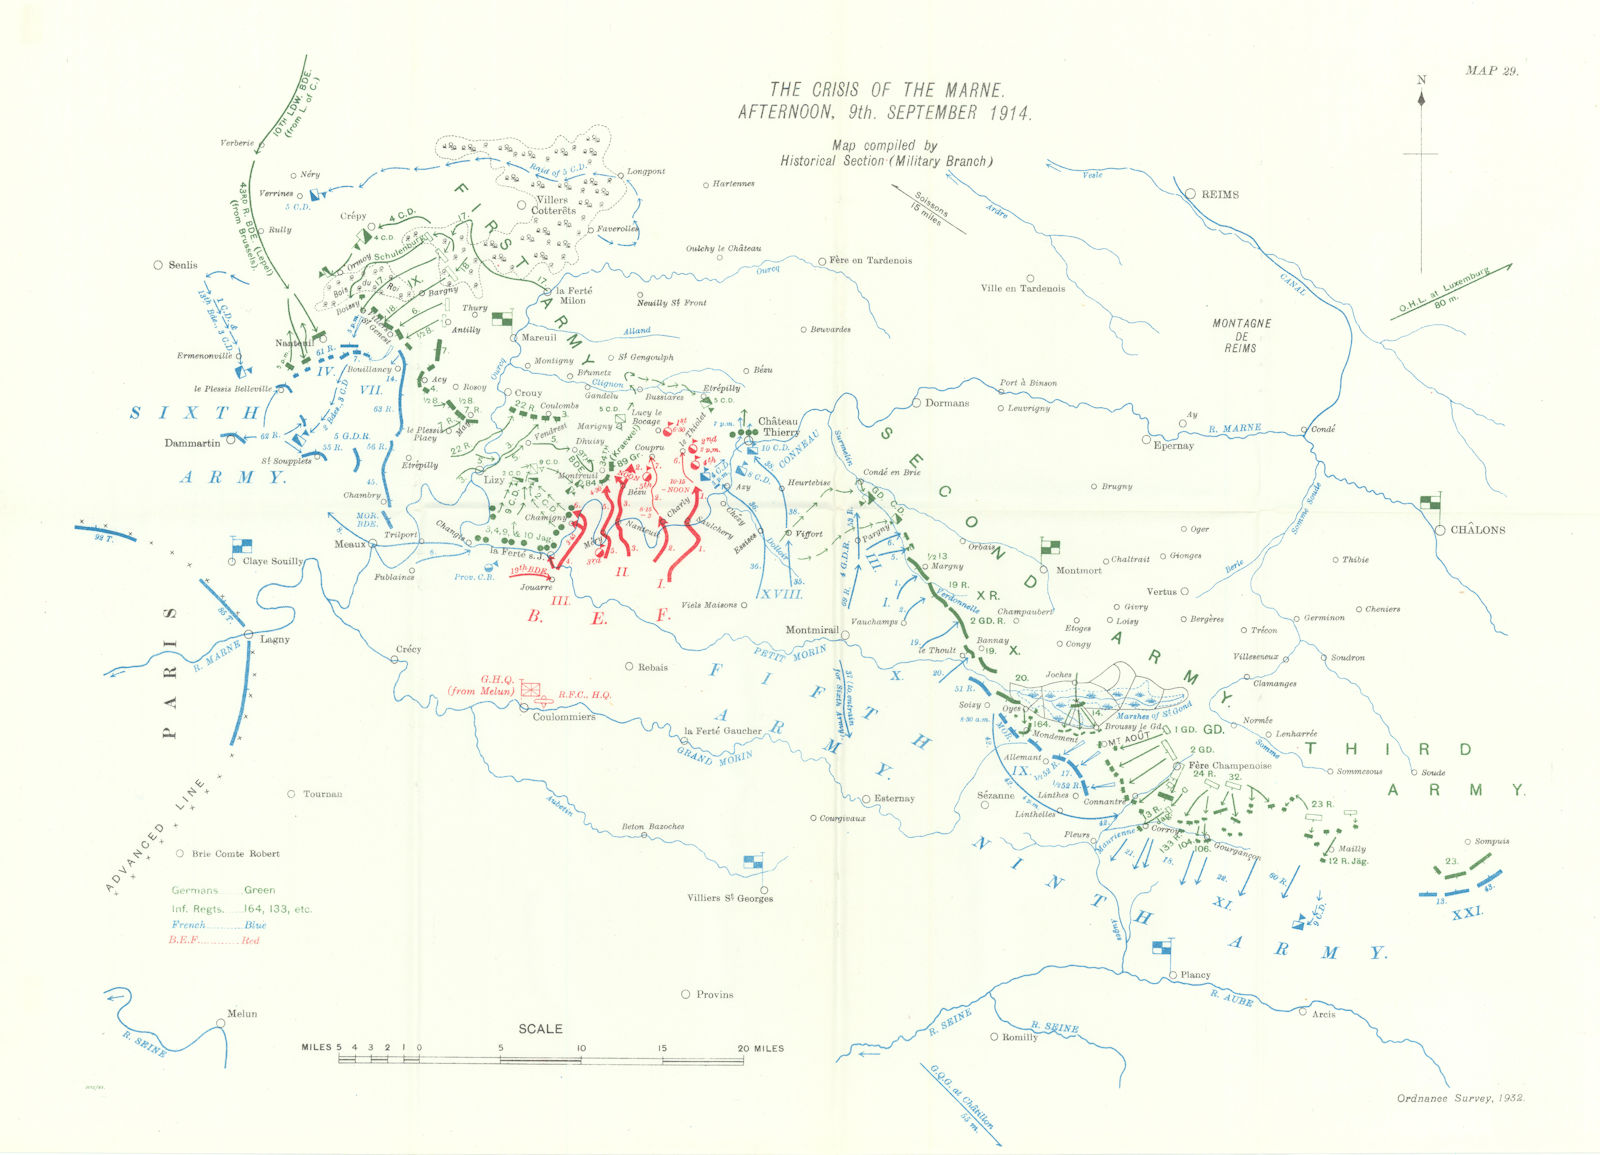 Crisis of Marne. Afternoon, 9th September 1914. Battle of Marne. WW1. 1933 map